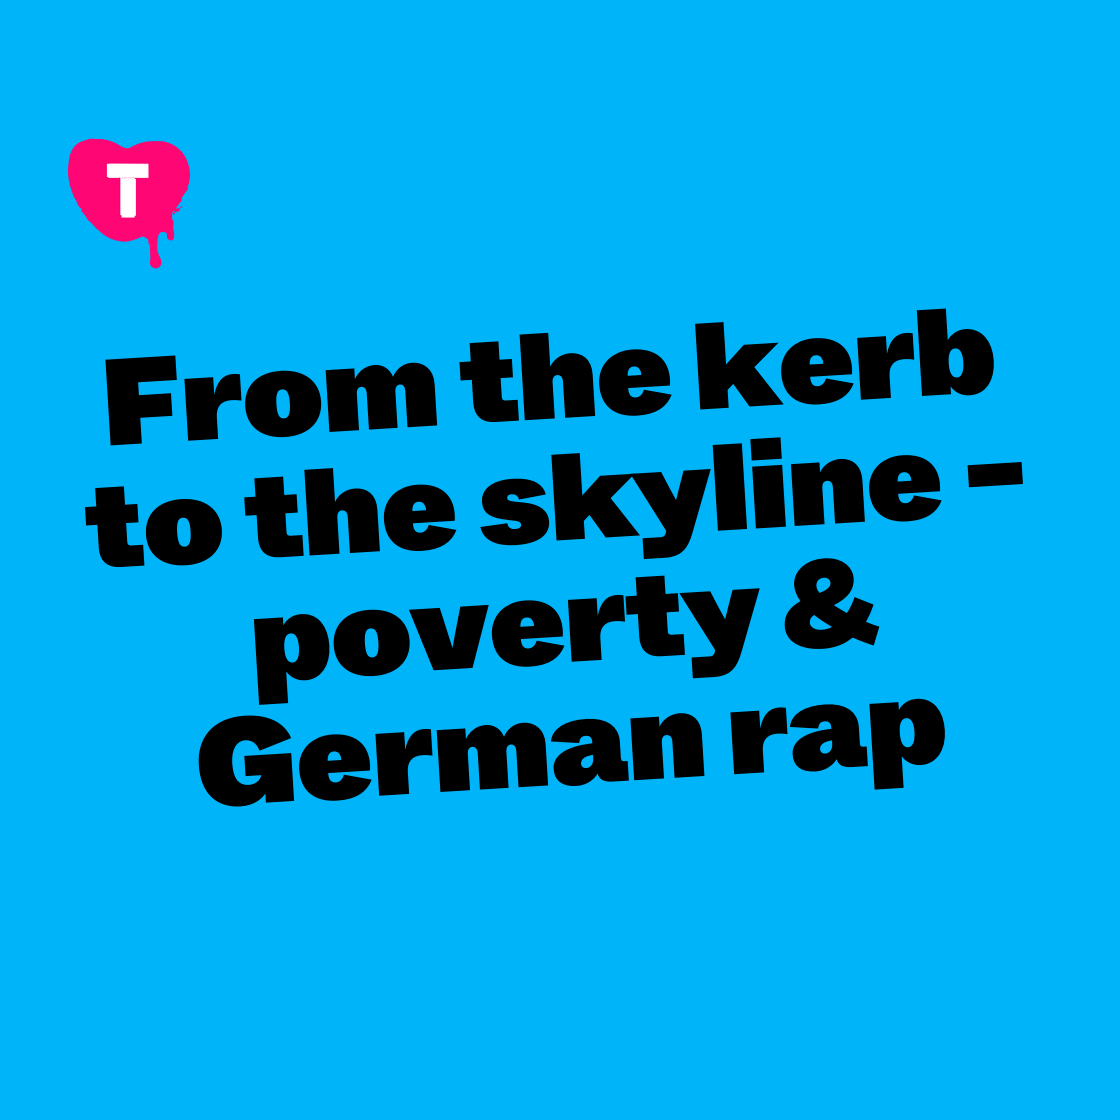 From the kerb to the skyline - poverty & German rap